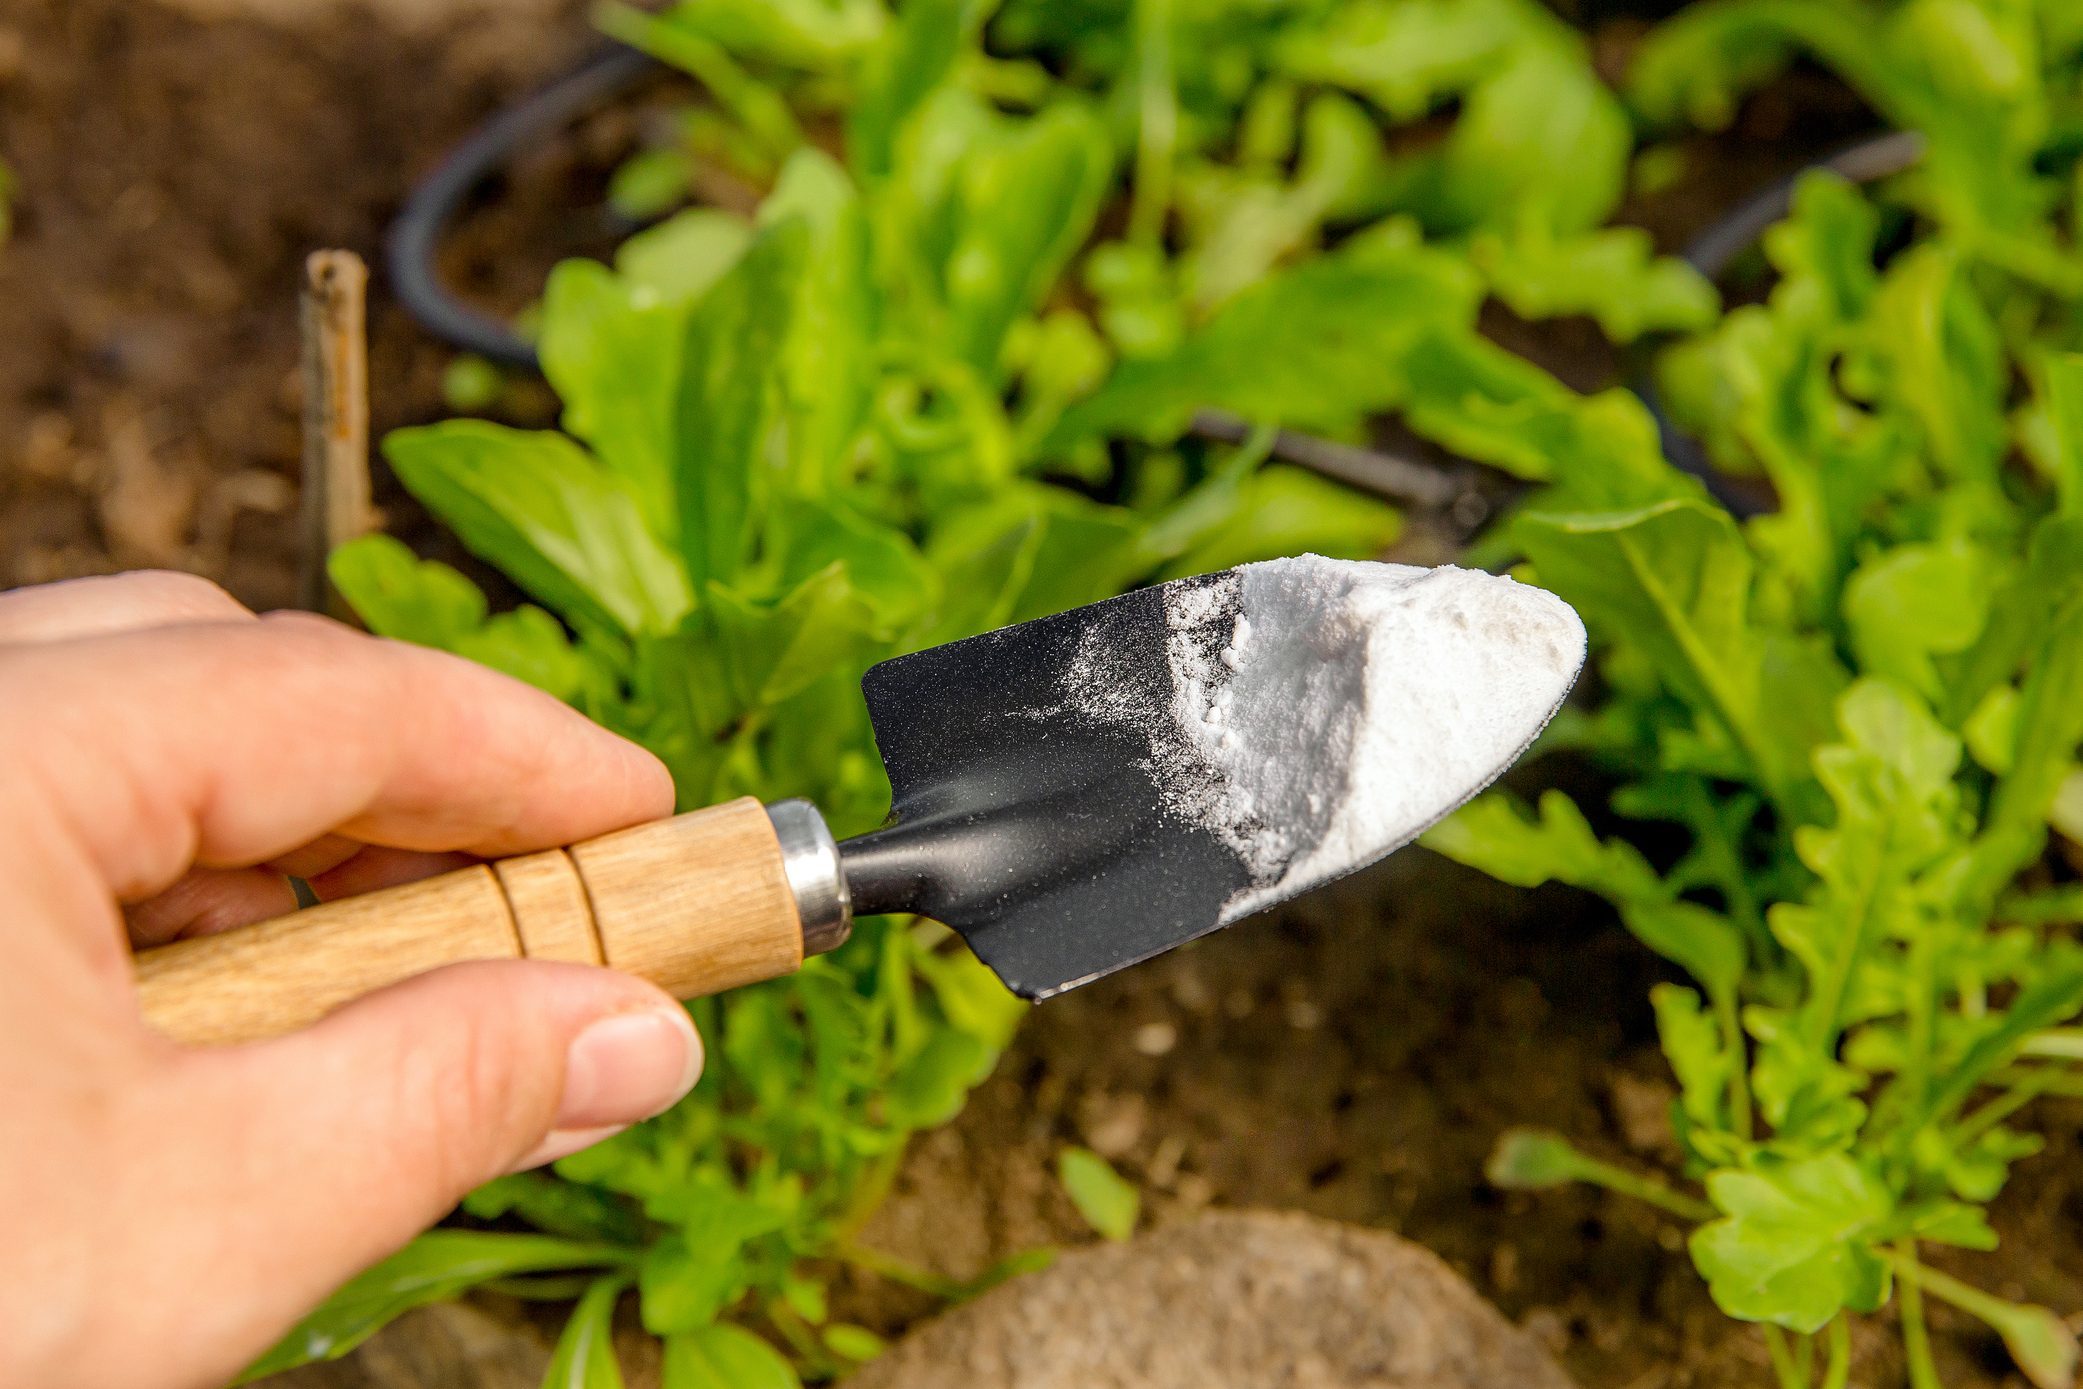 Should You Use Baking Soda in Your Garden?